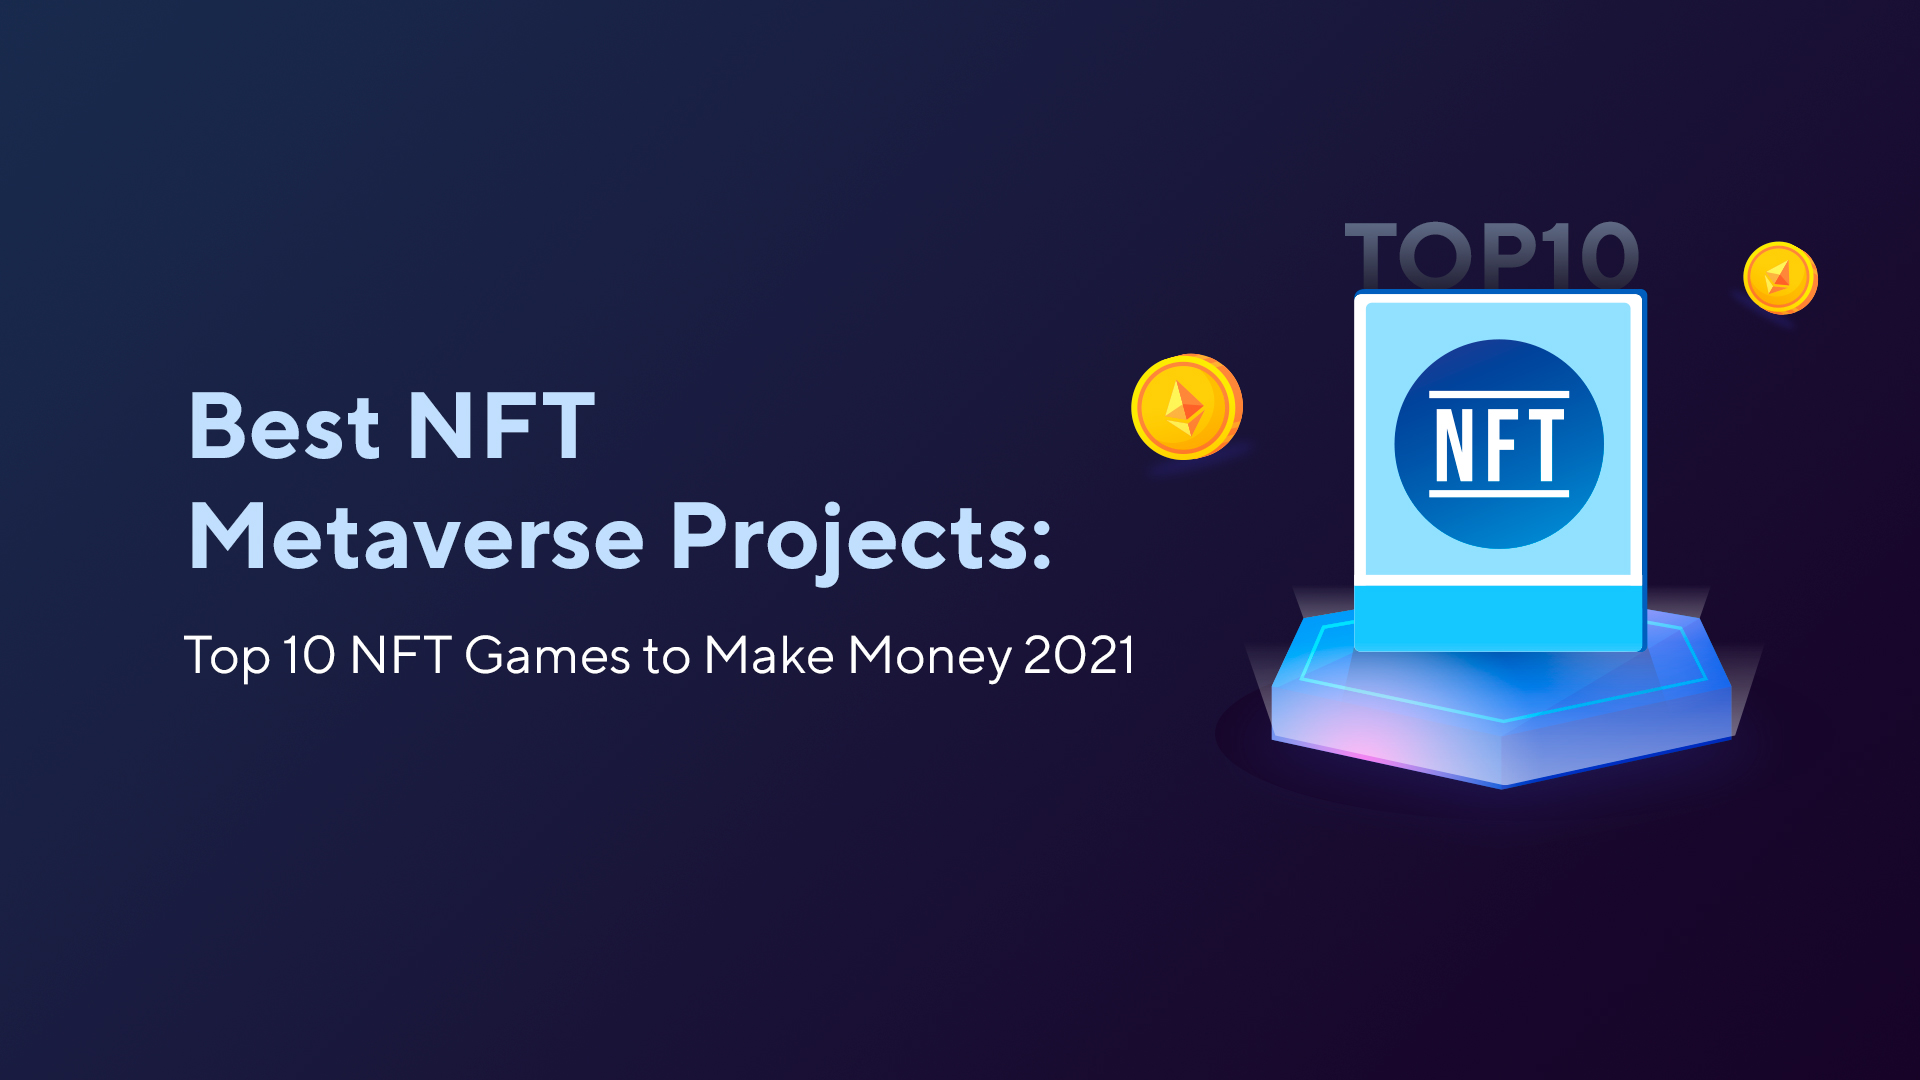 Best NFT Metaverse Projects: Top 10 NFT Games to Make Money 2023